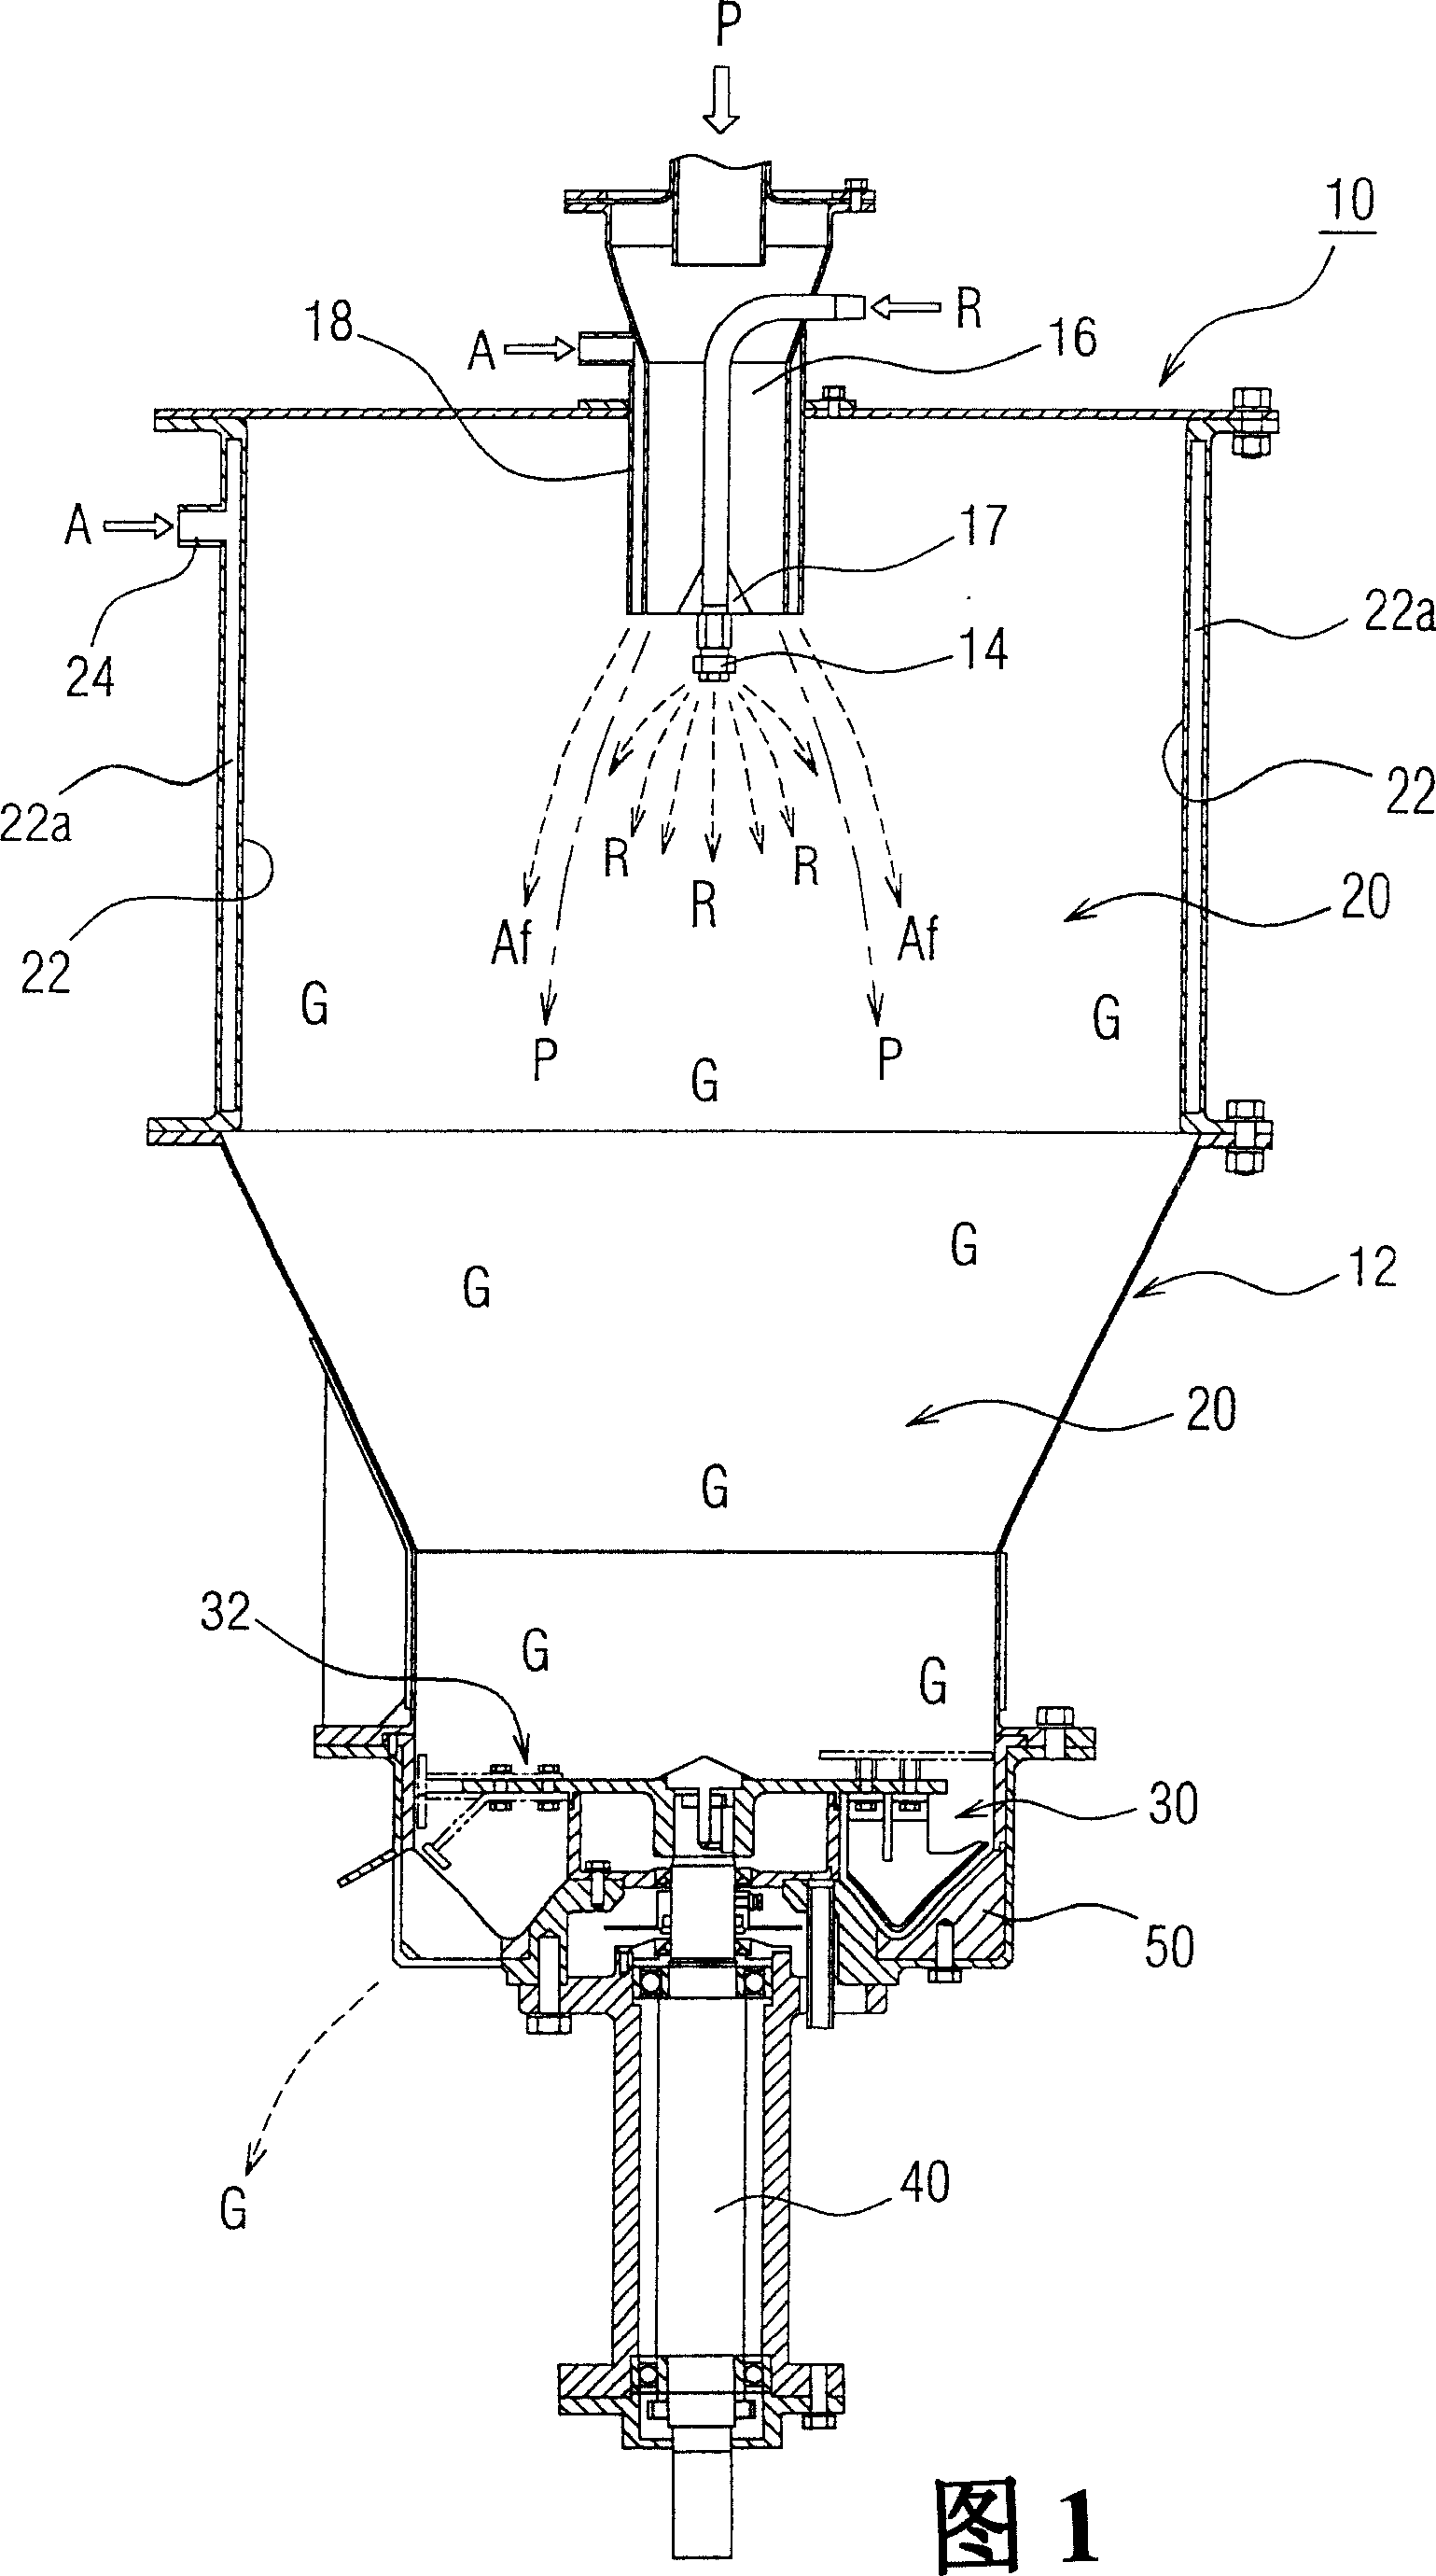 Method and apparatus for granulating by mixing powder and liquid continuously